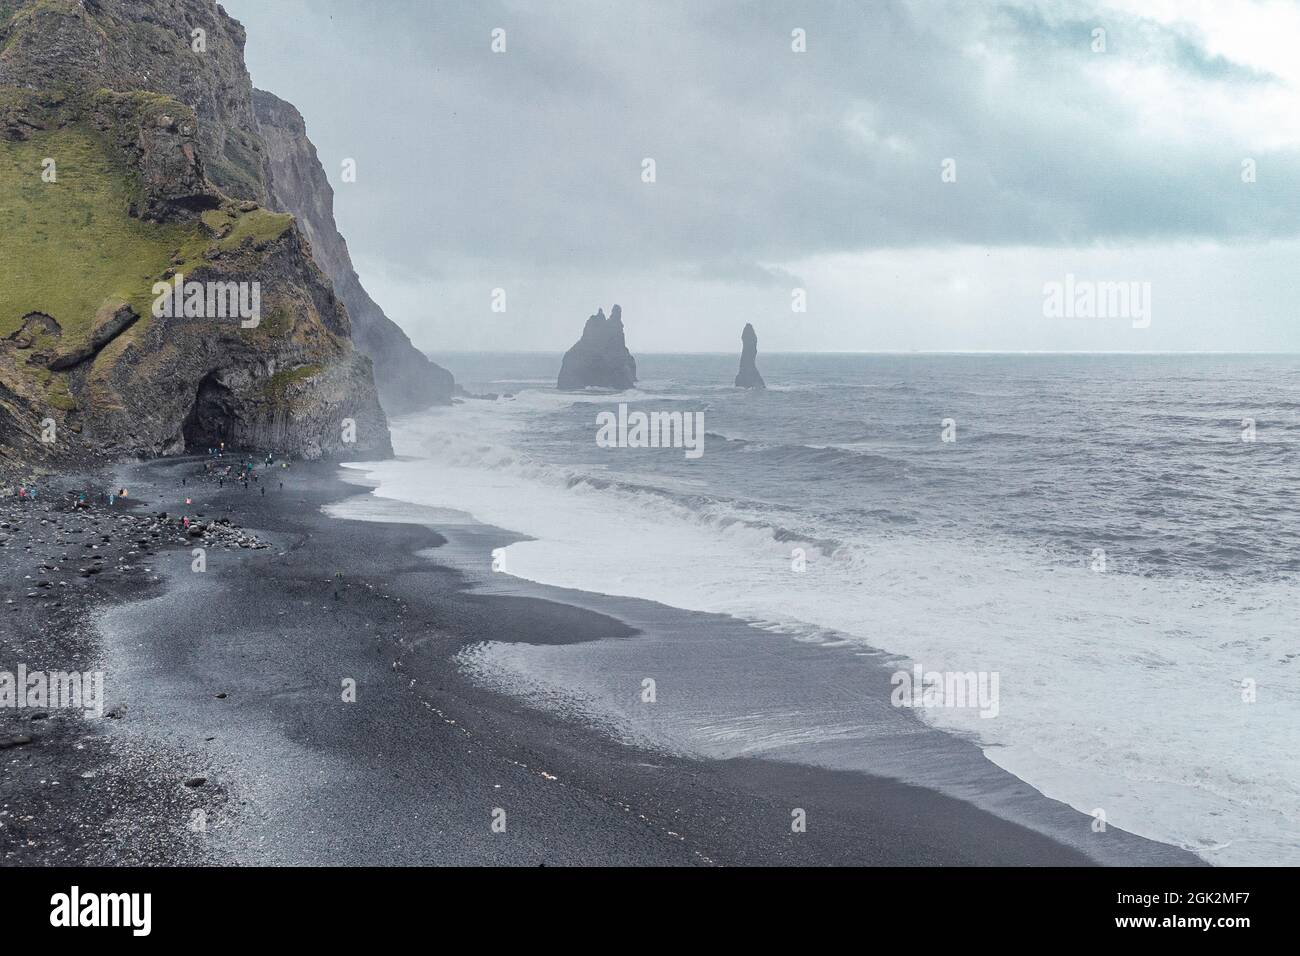 Aerial drone view of Reynisfjara beach in Iceland with big basalt pillars and rocky beach. Cold windi place at the beach with big waves. Stock Photo